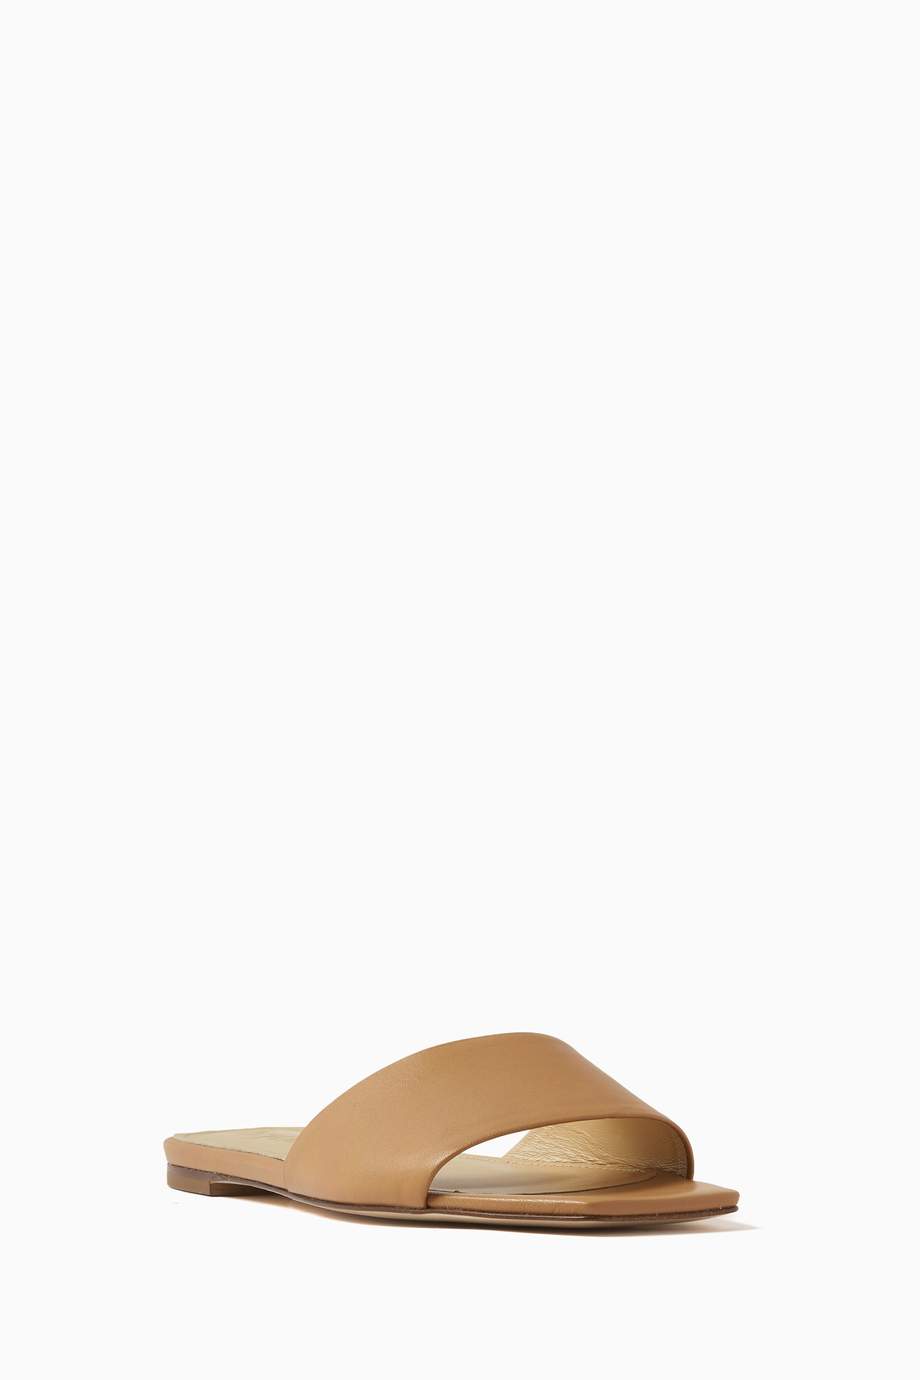 Shop Aeyde Neutral Anna Flat Sandals in Nappa for Women | Ounass UAE